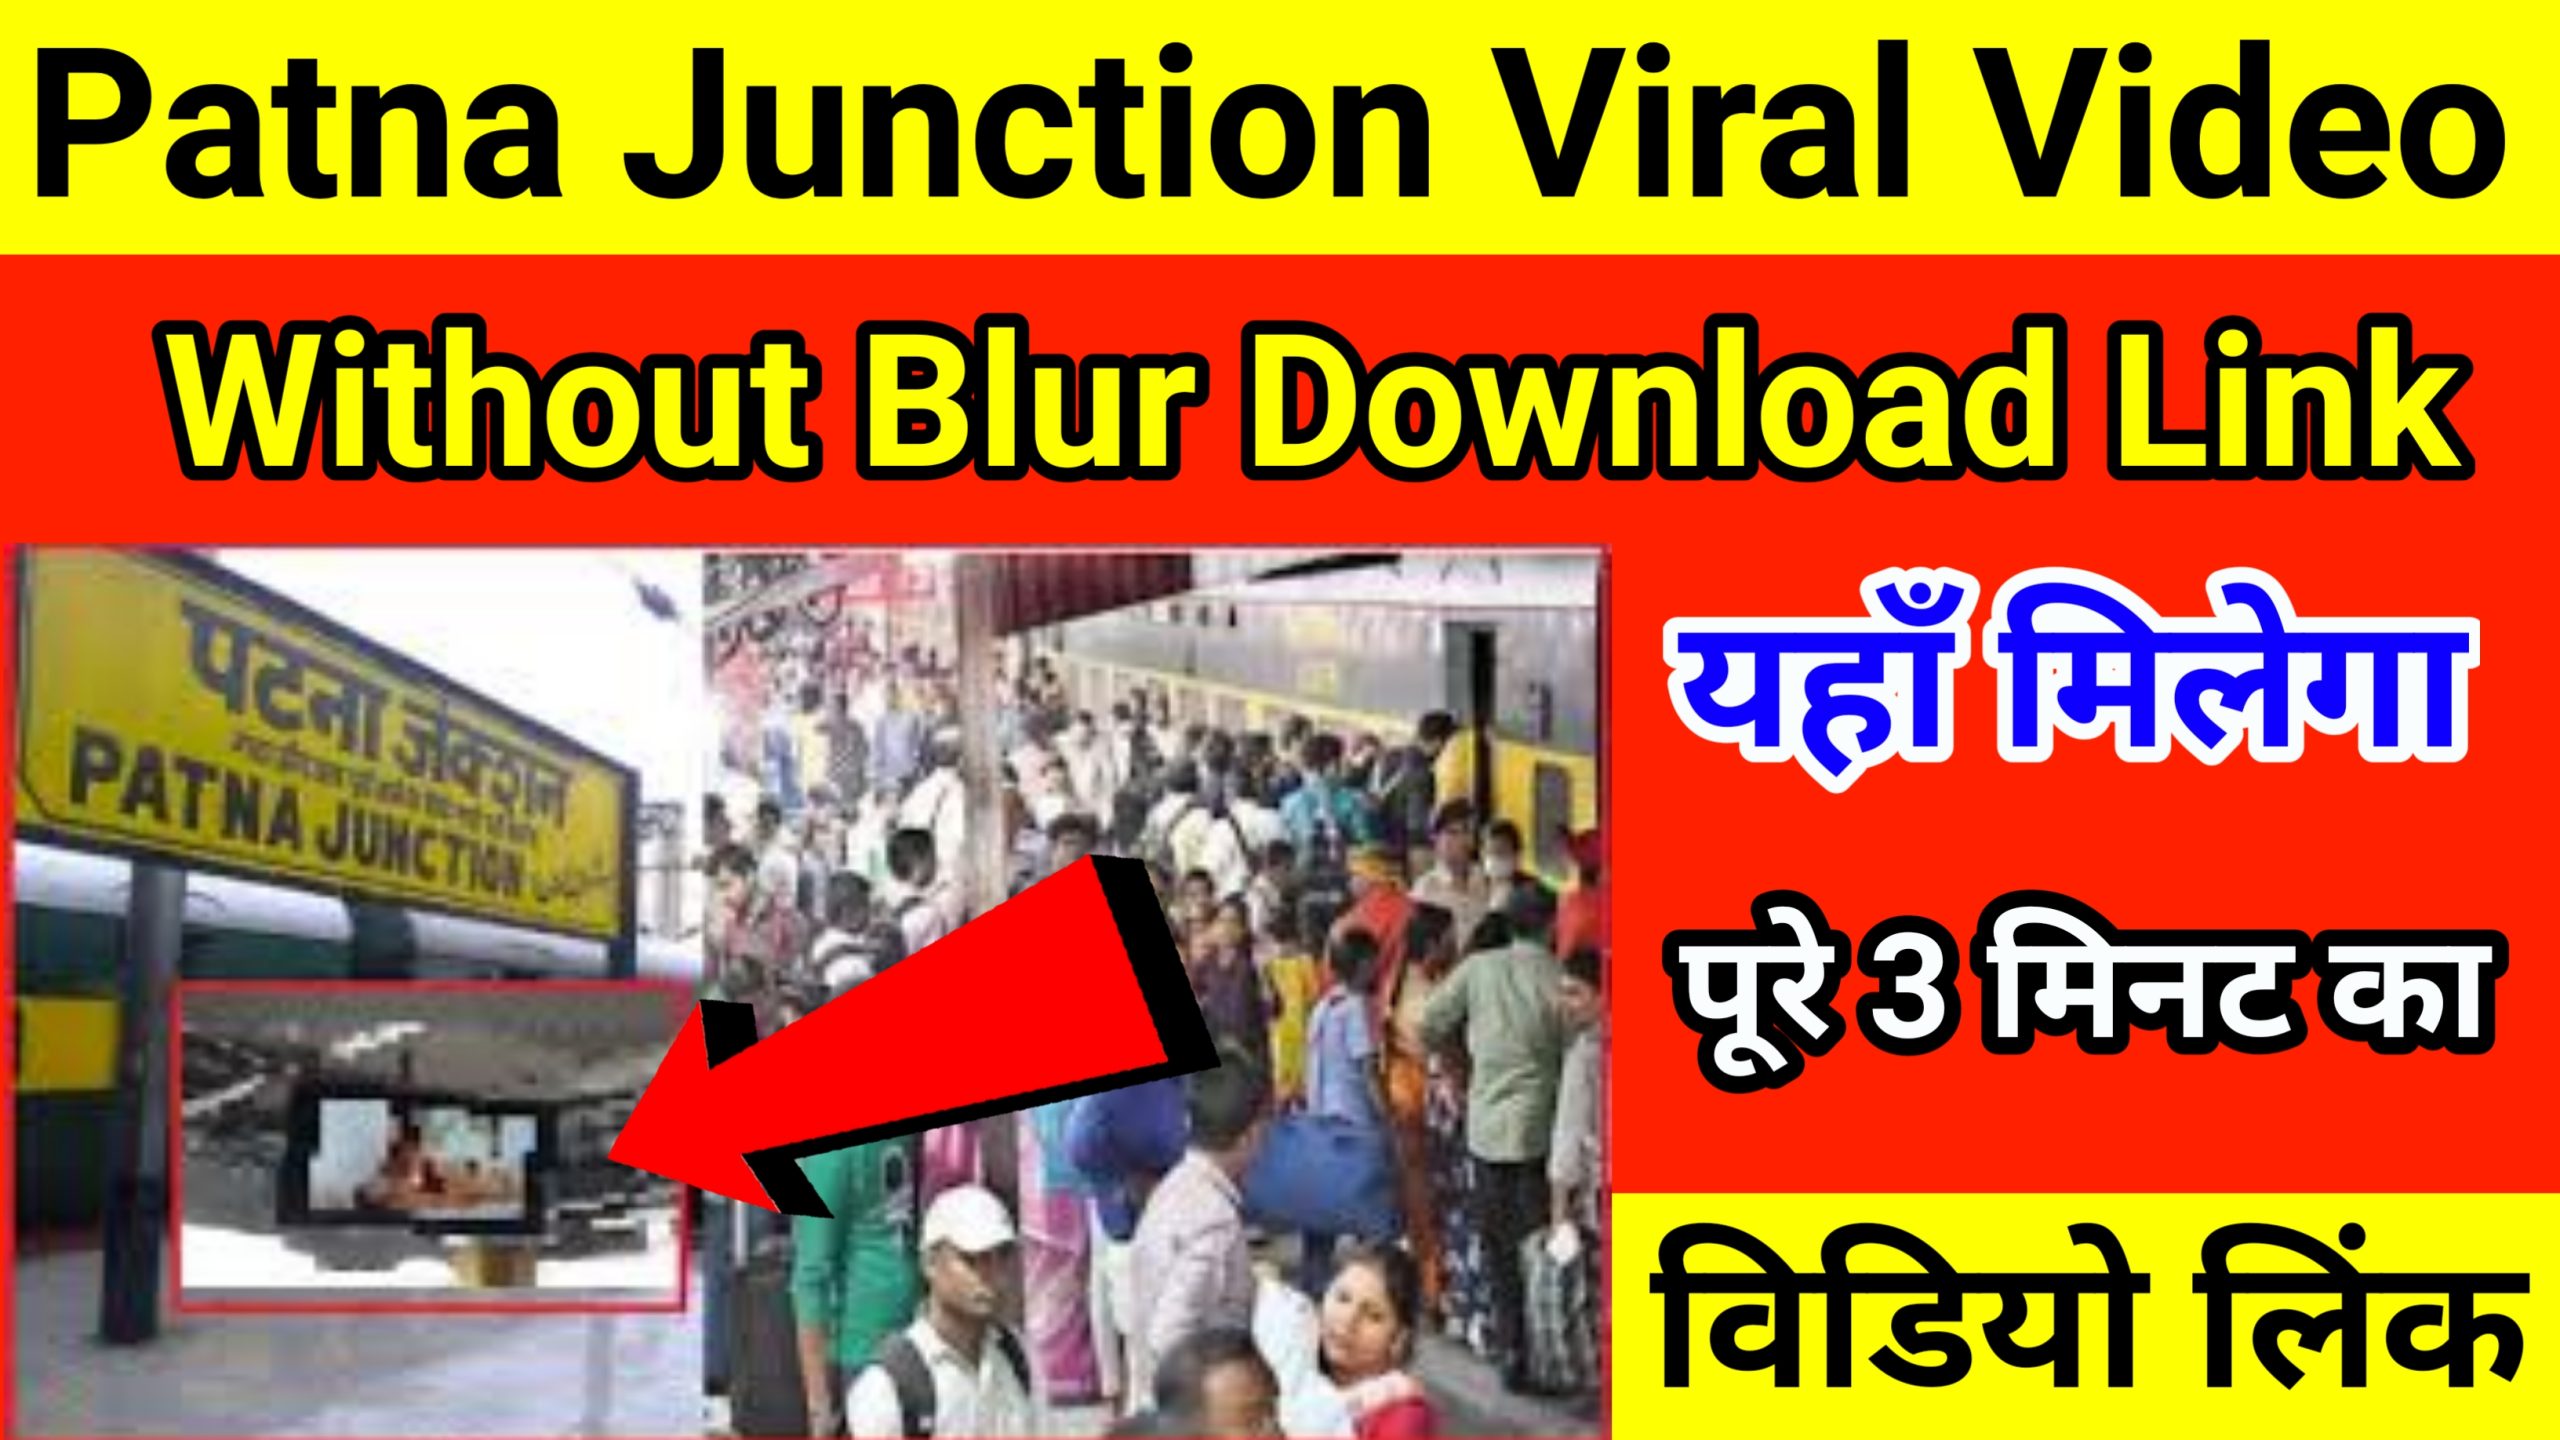 Patna Junction Viral Video Without Blur Download Link यहाँ है? 